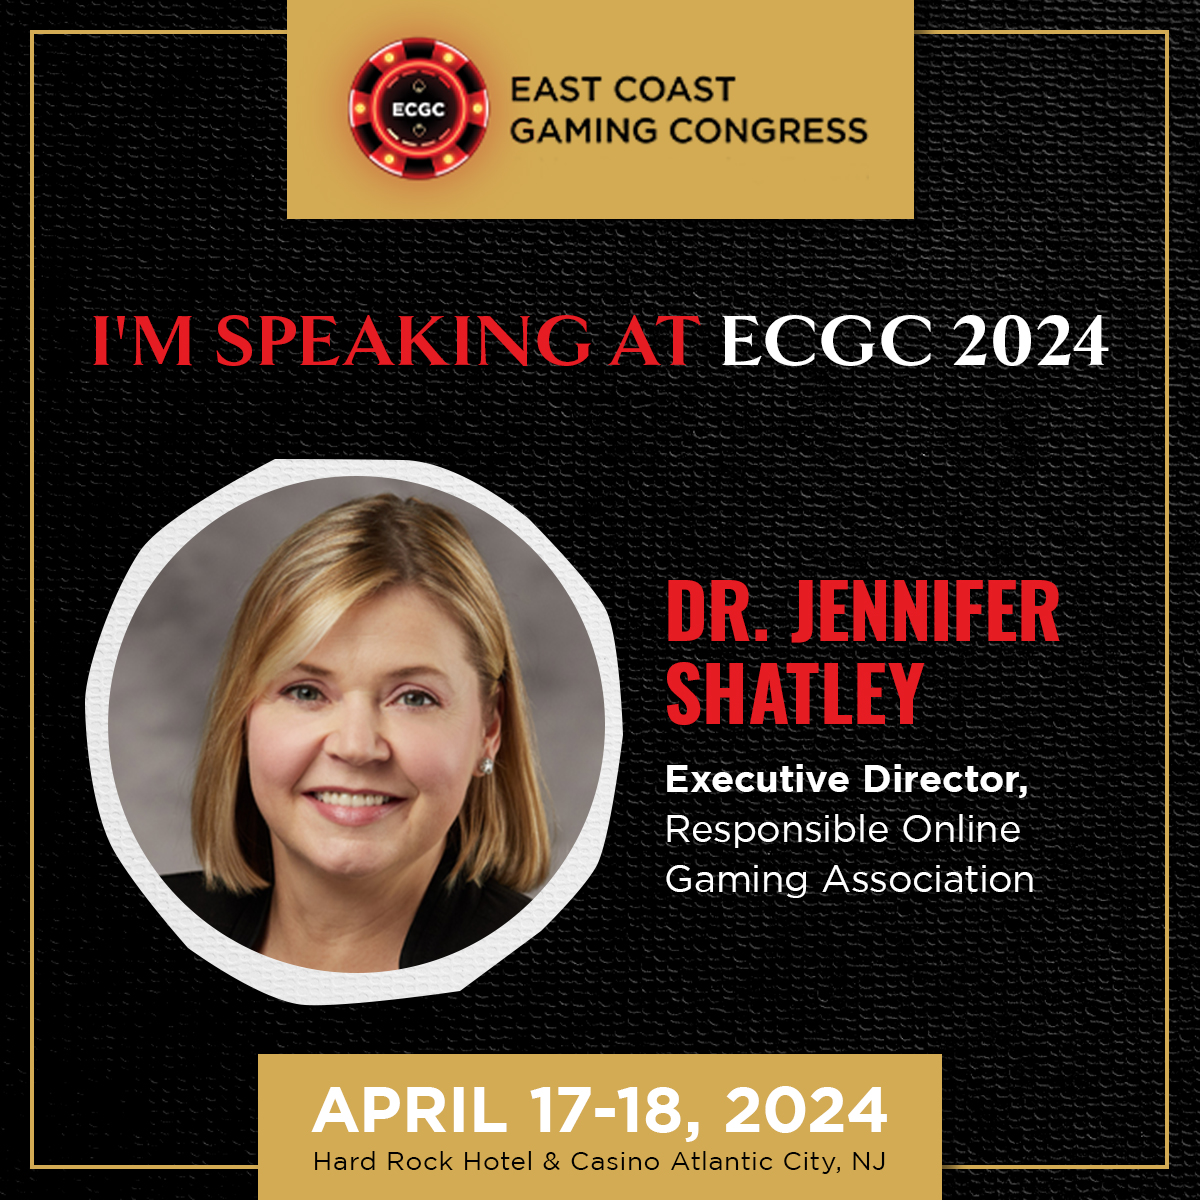 We are excited to announce that Dr. Jennifer Shatley, the Executive Director of #ROGA, will be speaking at @EastCoastGaming next week on the 'Responsible Gaming: Whose Responsibility?' panel.

Learn more here: loom.ly/flmfjuY

#responsiblegaming #ECGC